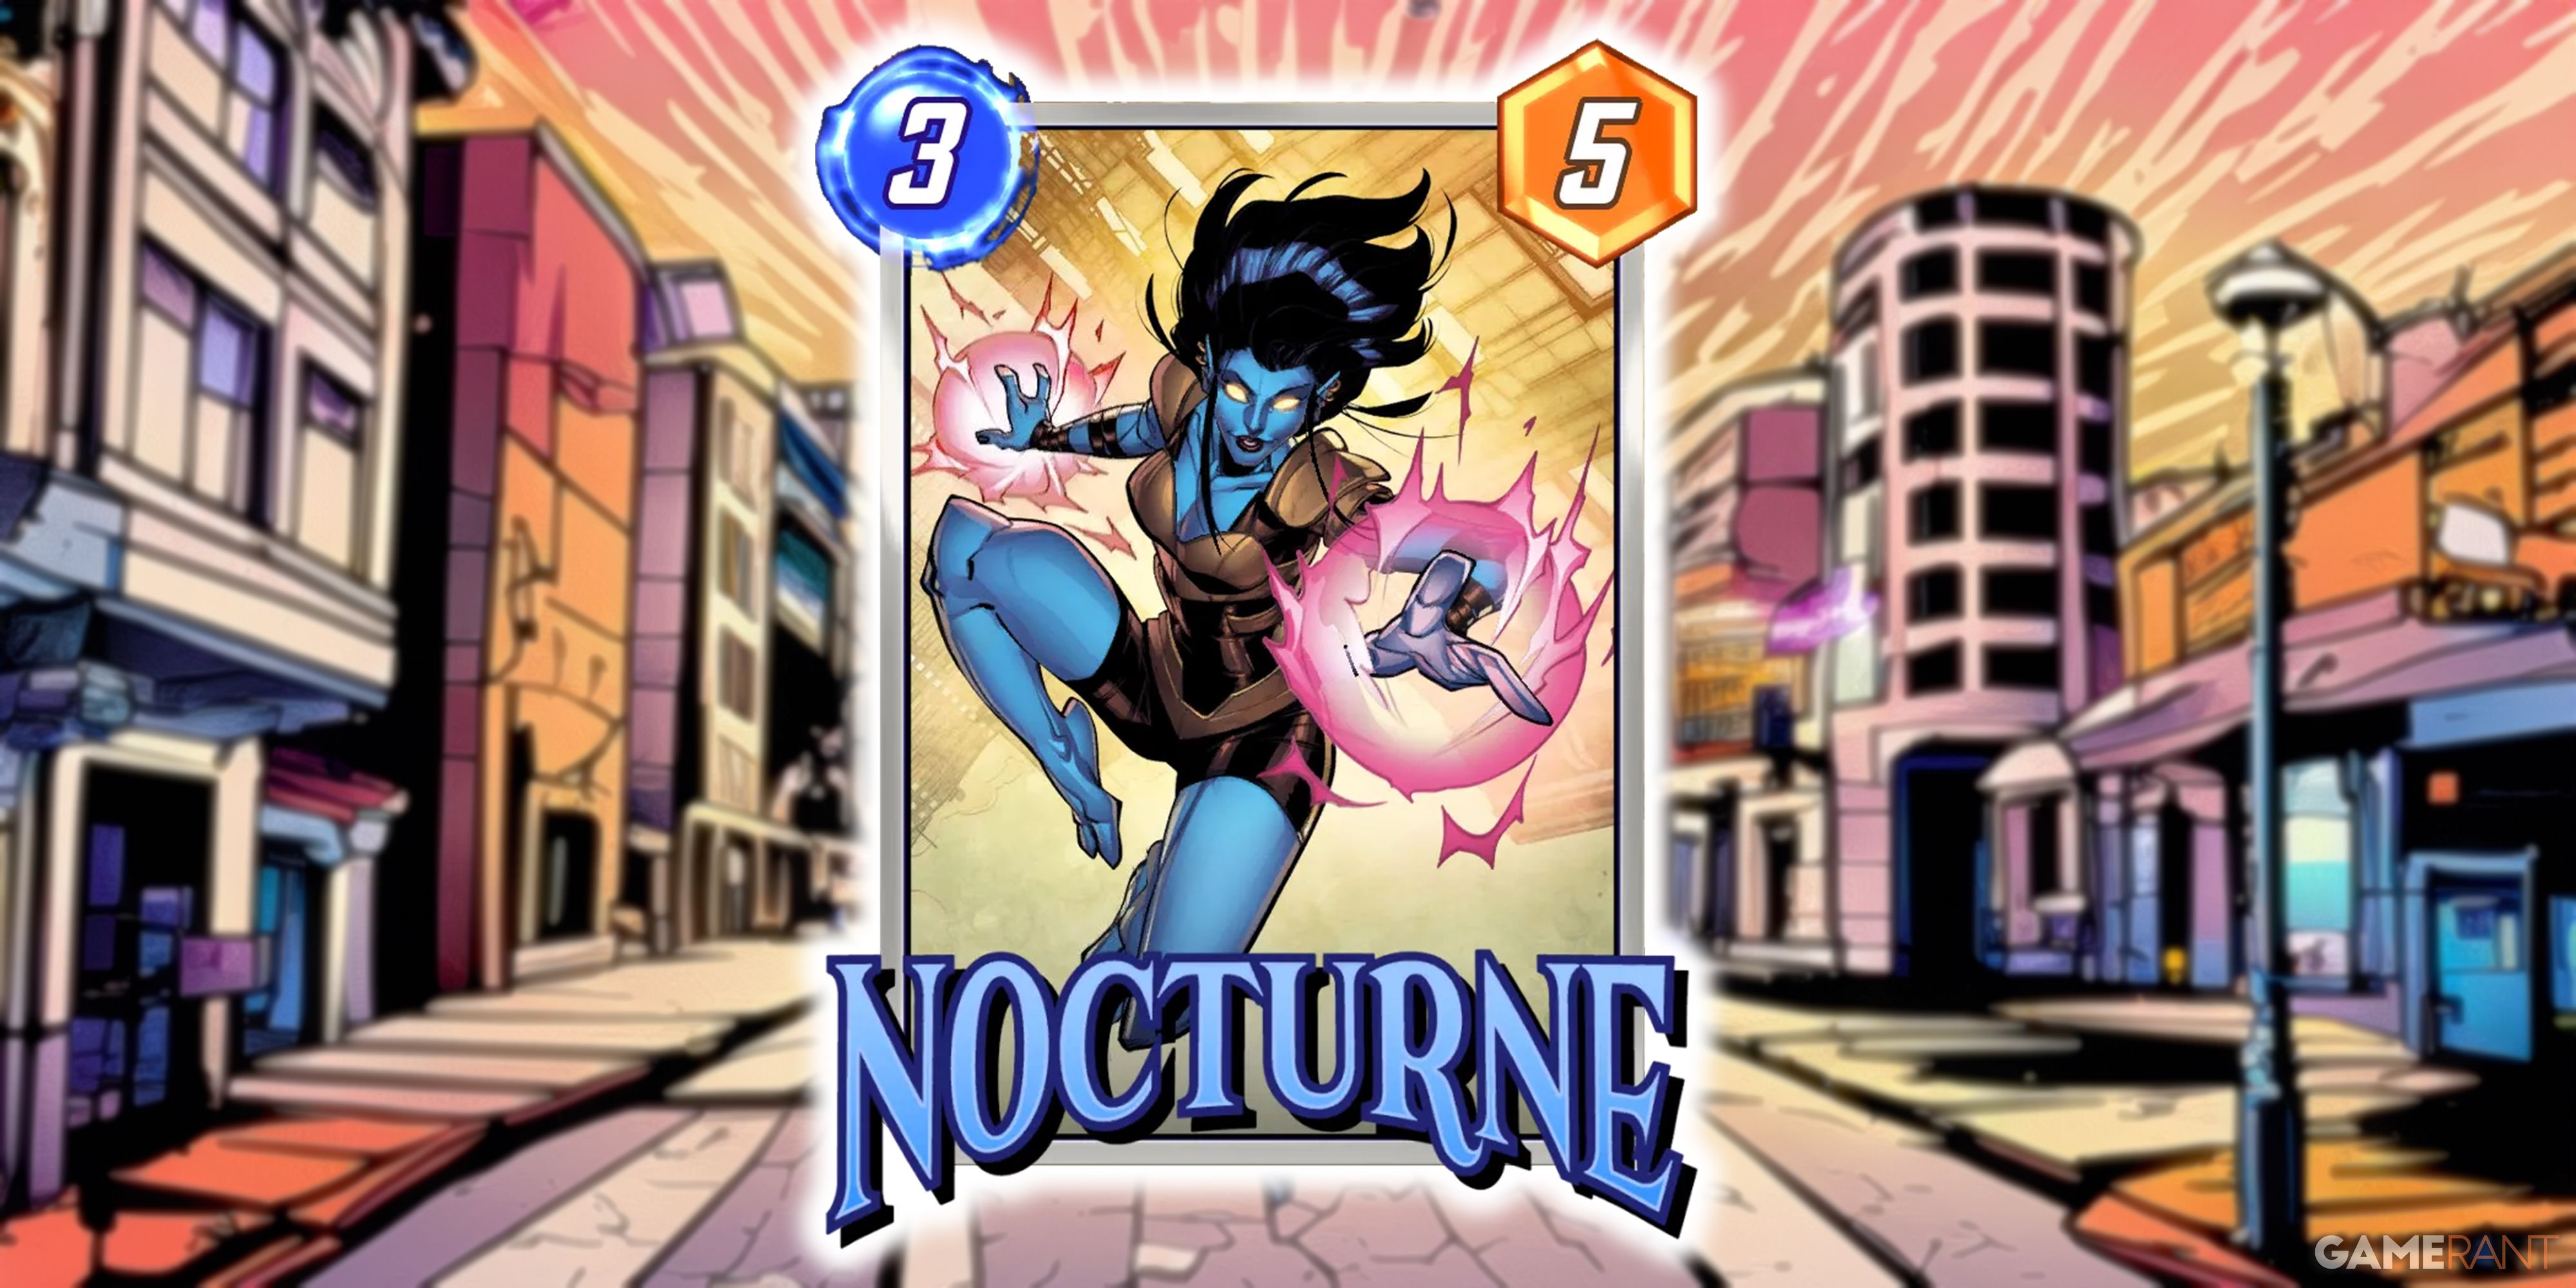 Marvel Snap's Nocturne card with a city street in the background.